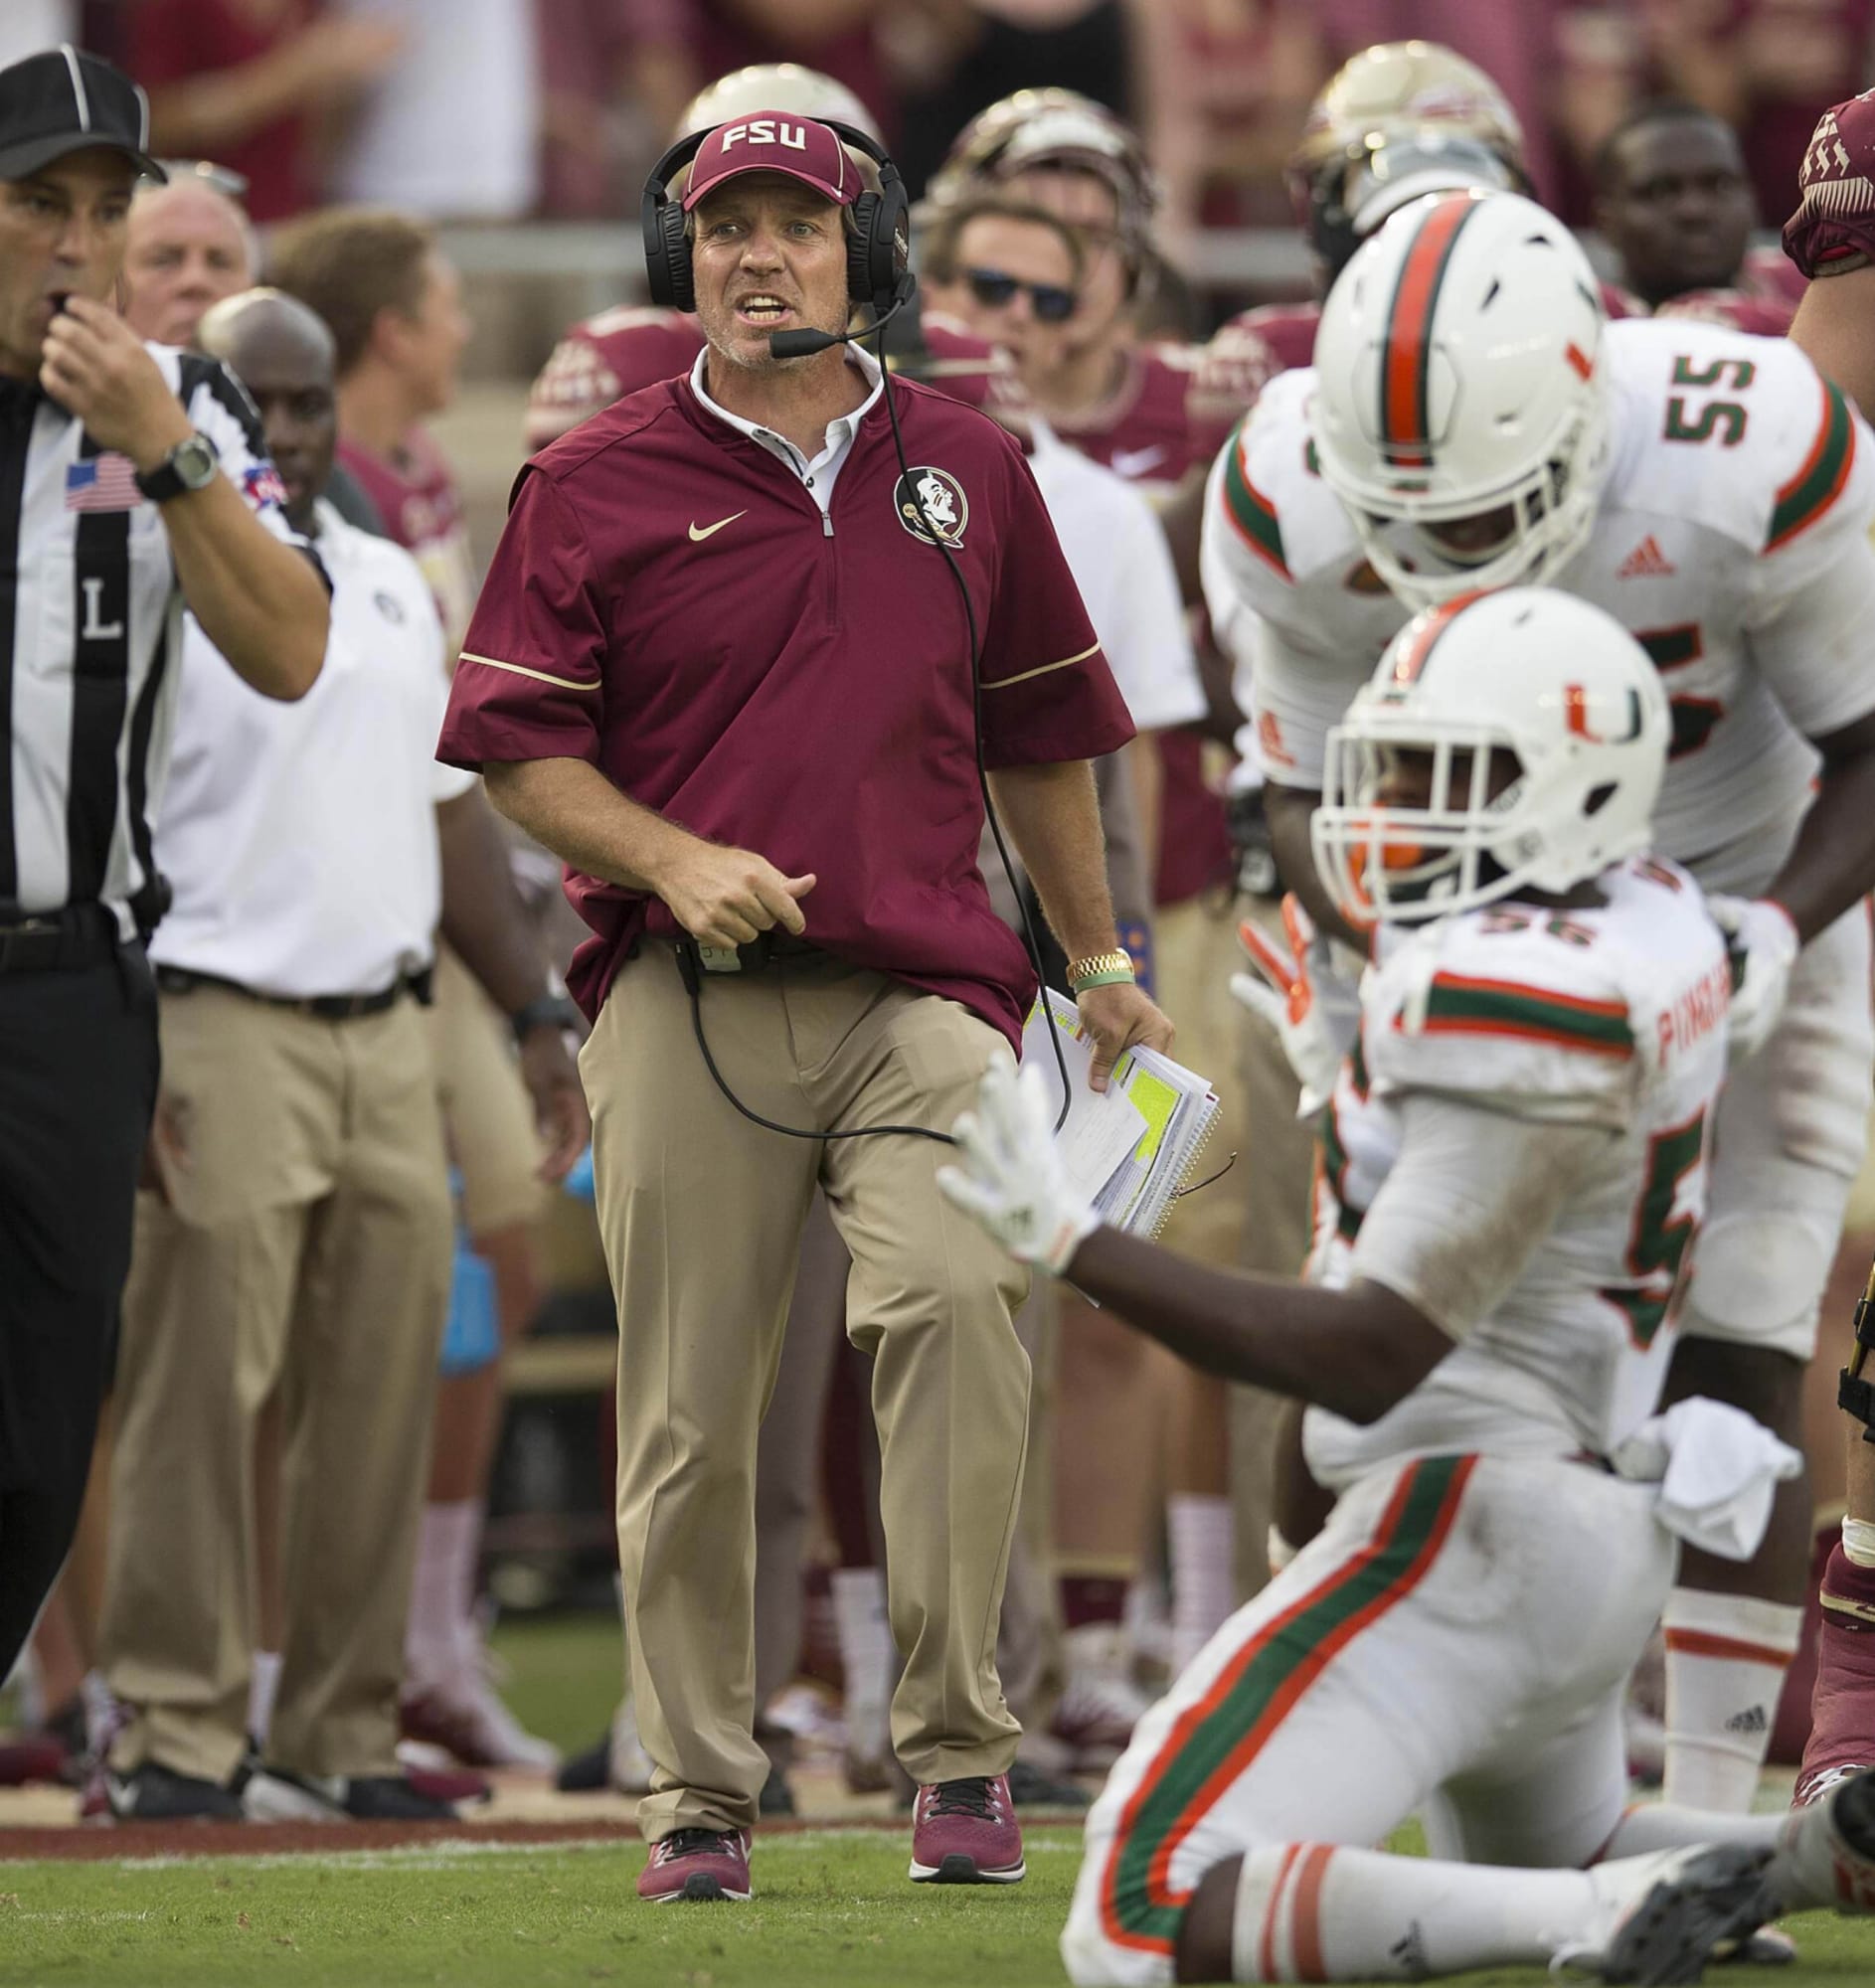 Miami football faces challenge versus Texas A&M after loss